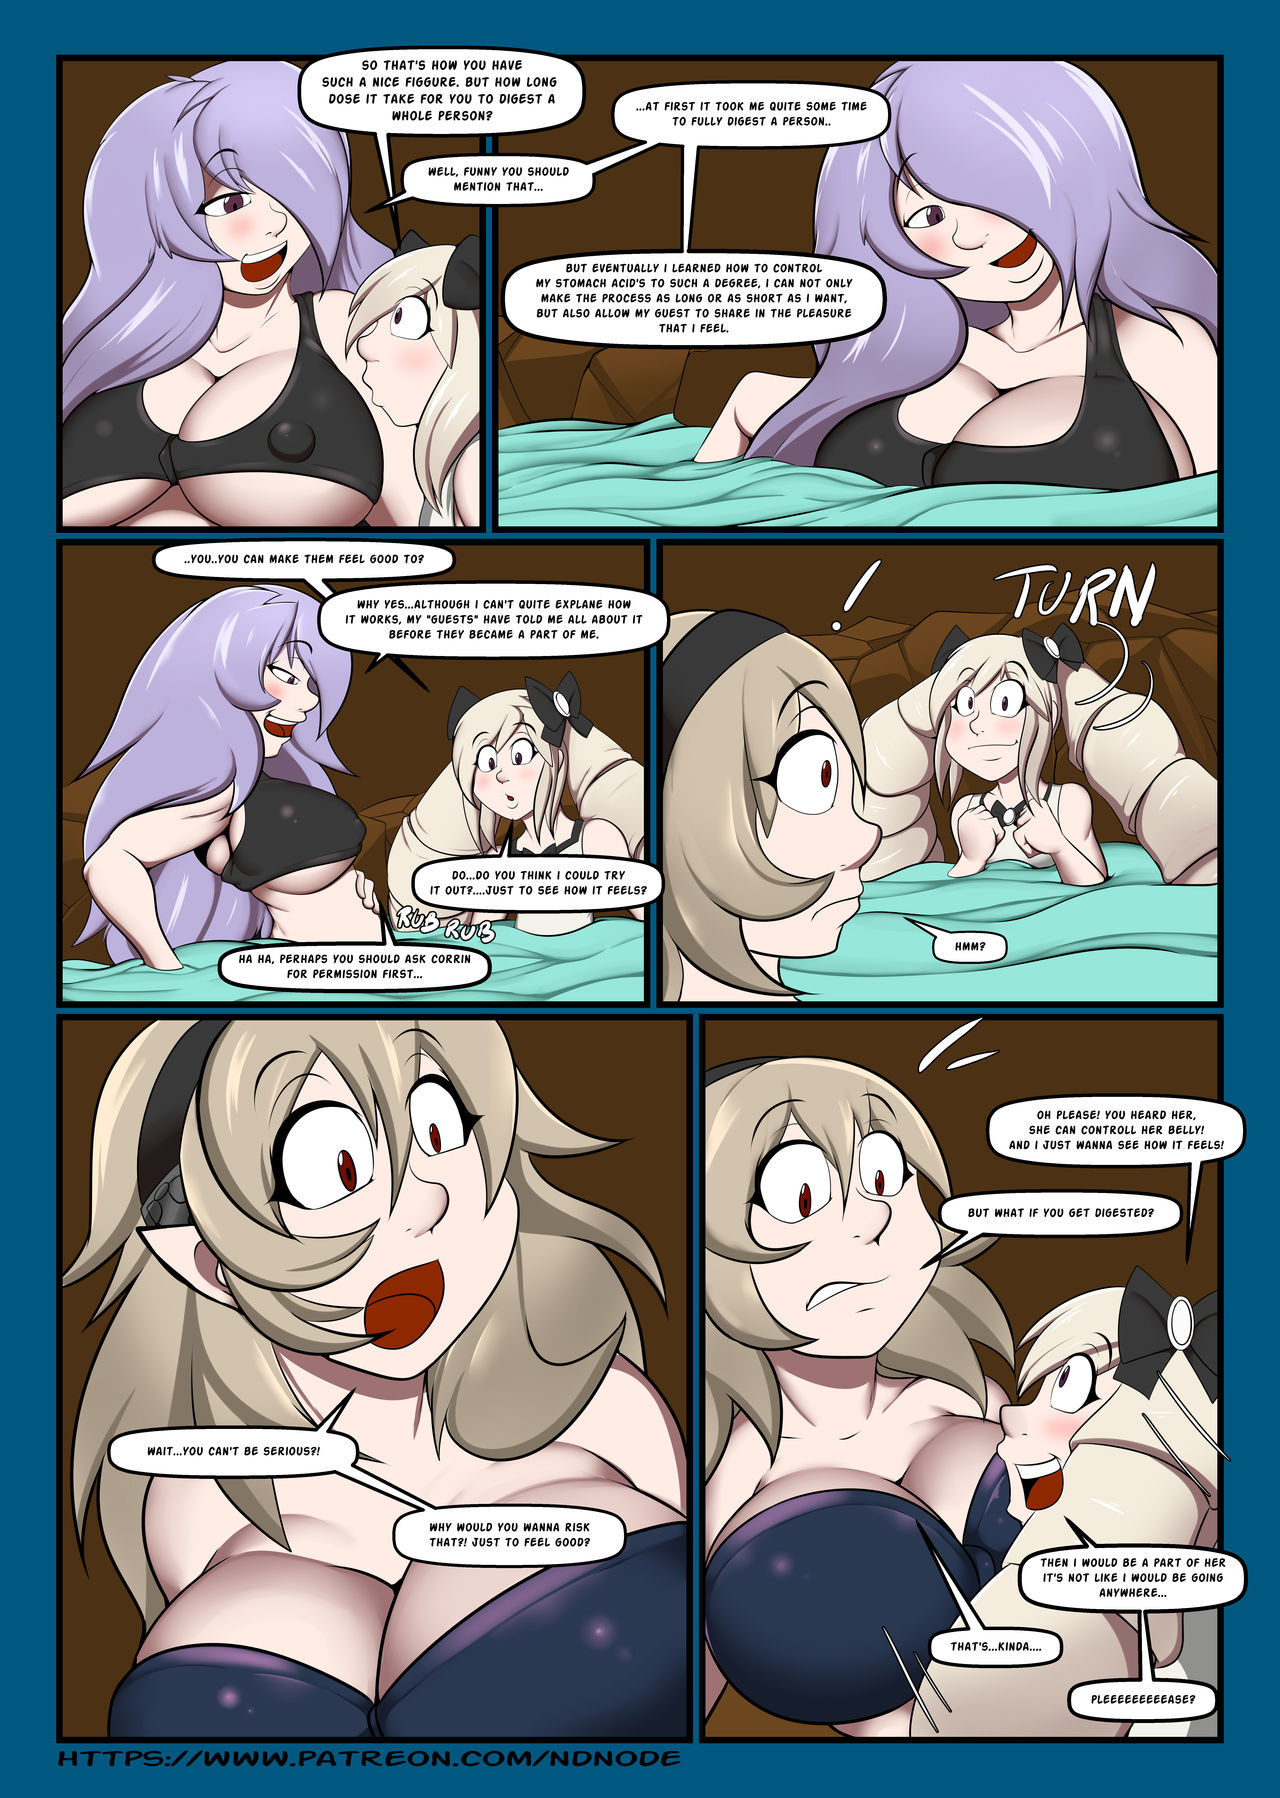 Family Fates: Ingestion page 1